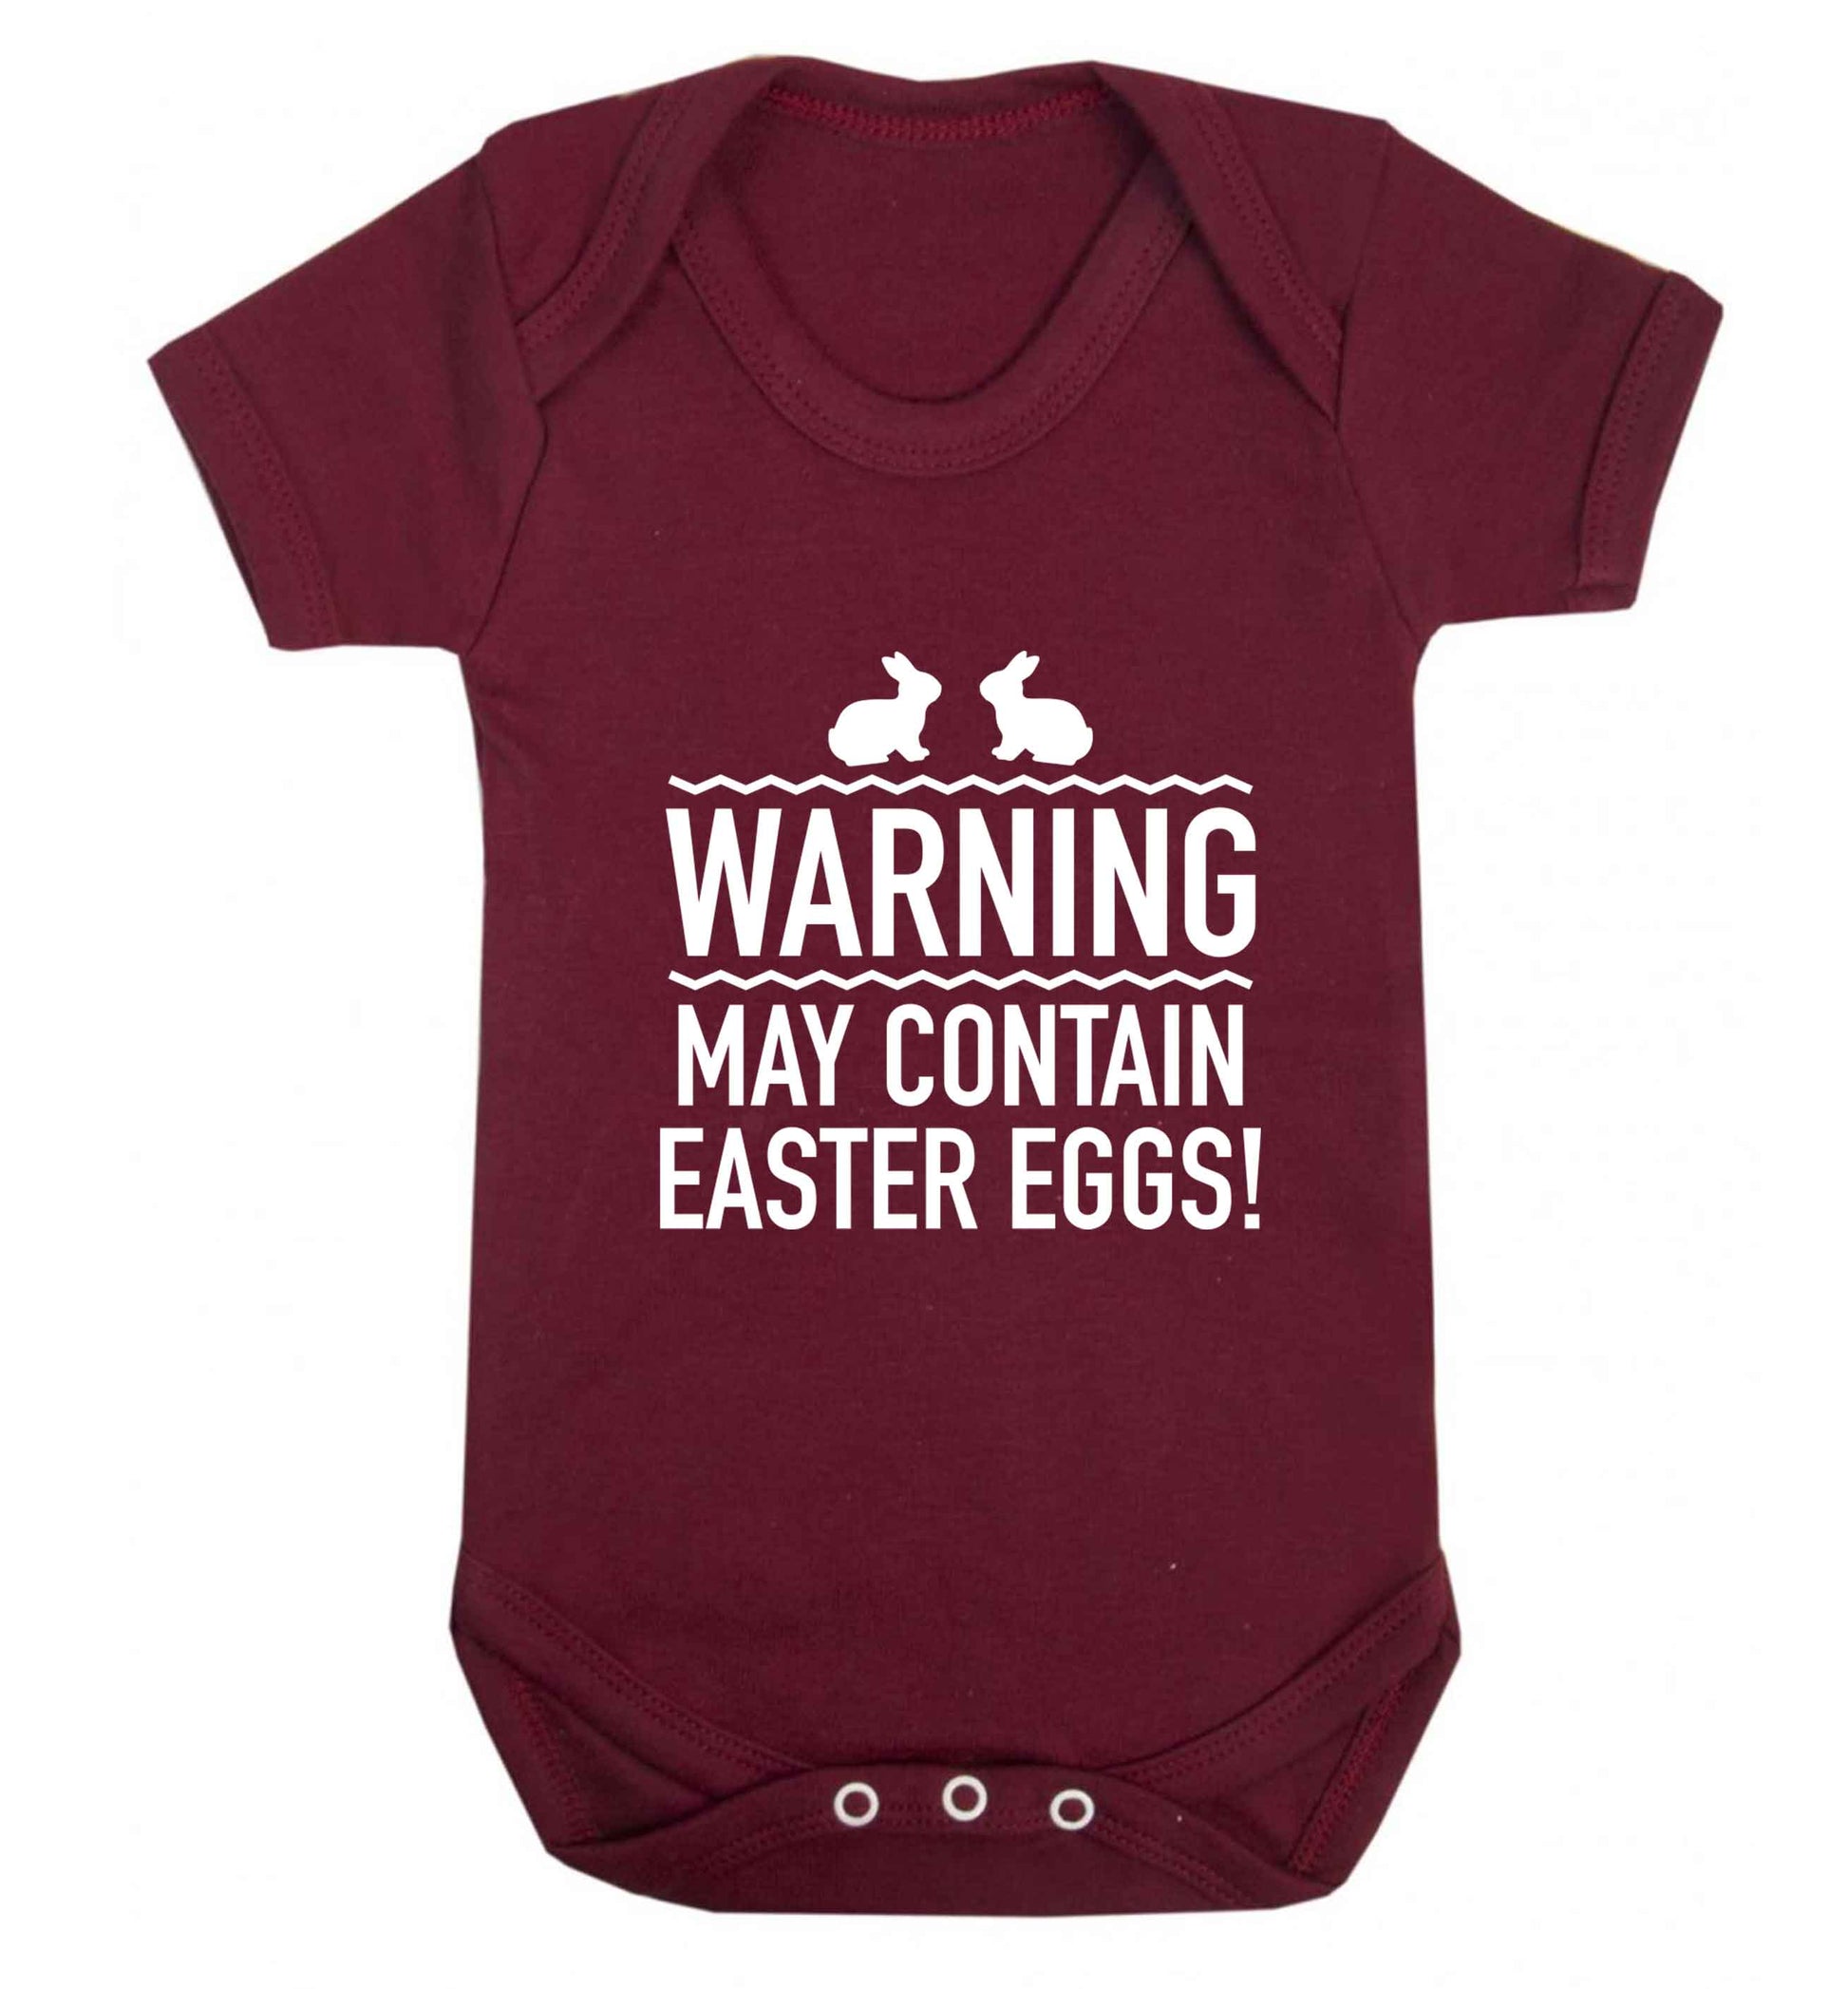 Warning may contain Easter eggs baby vest maroon 18-24 months